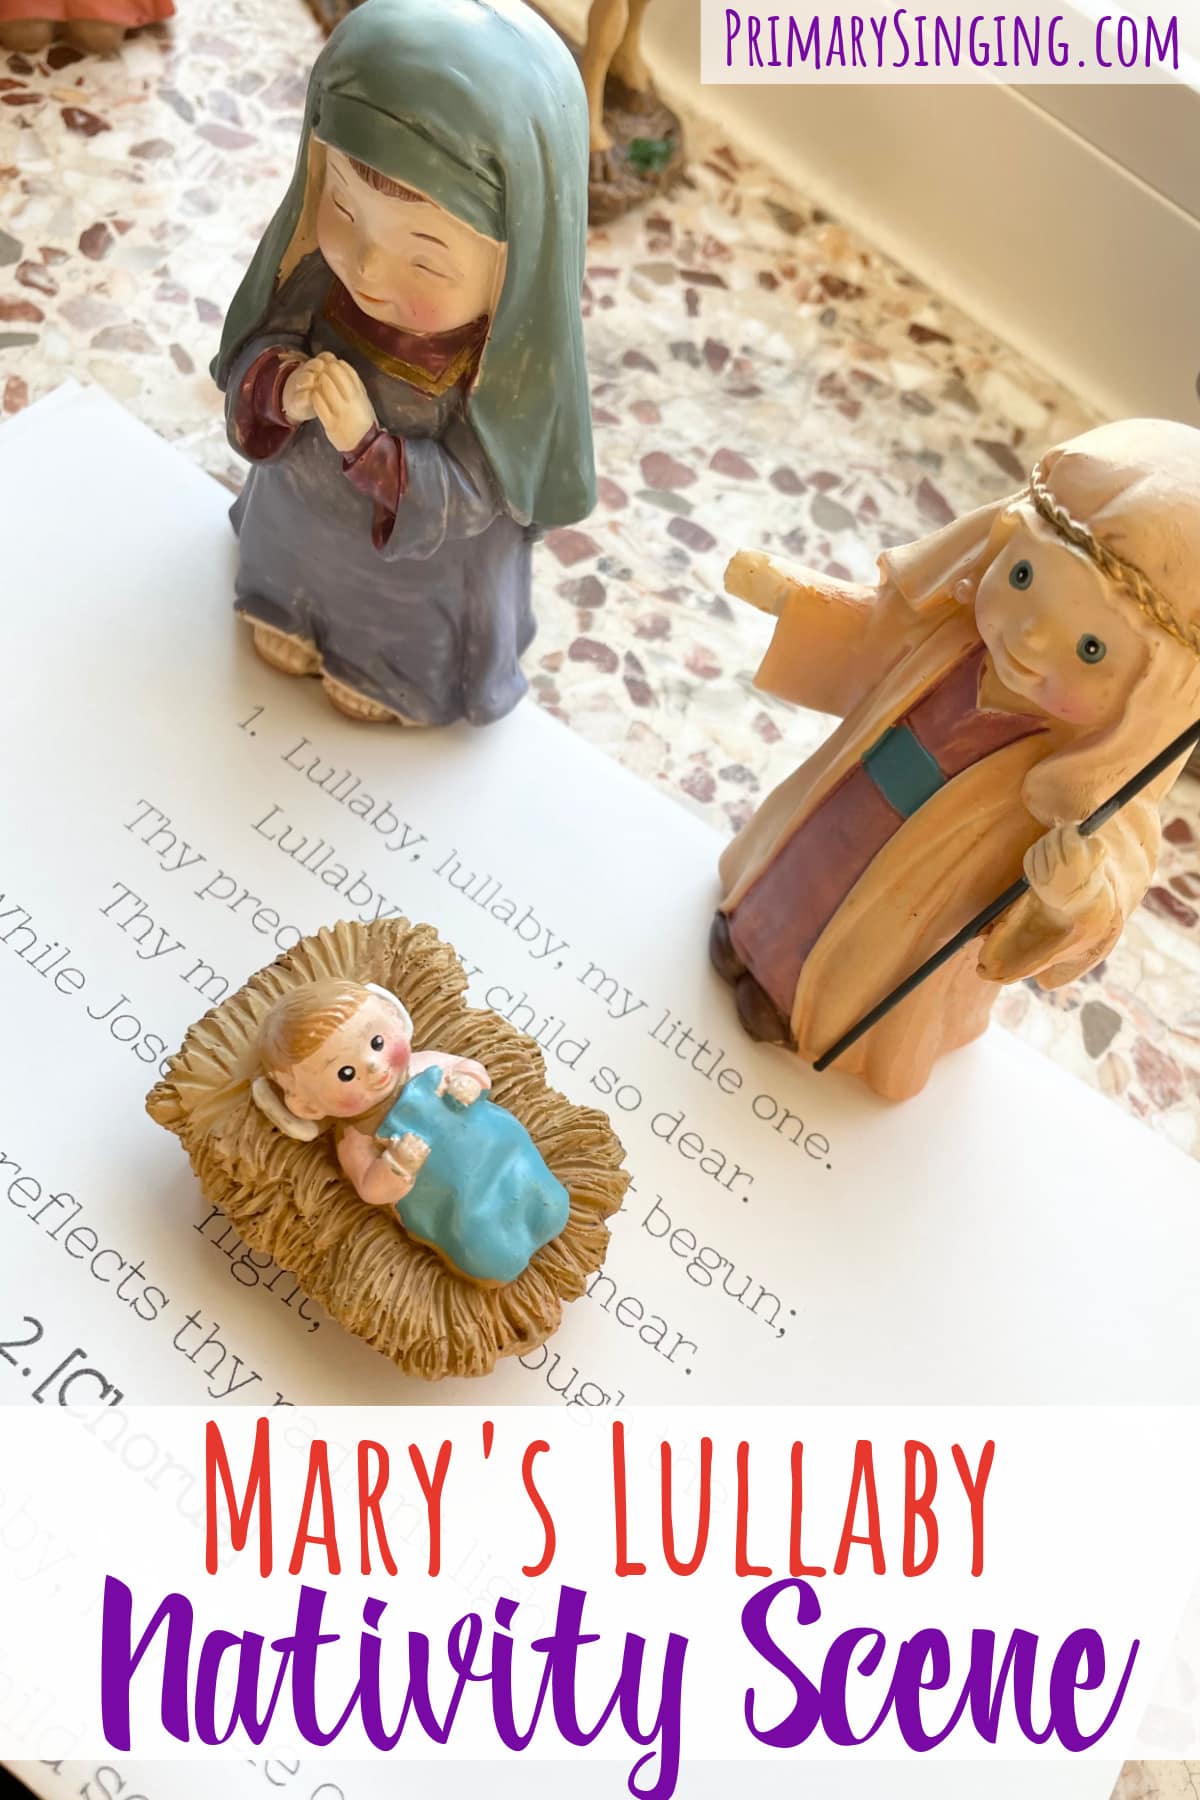 Mary's Lullaby Nativity Scene Activity Singing time ideas for Primary Music Leaders Marys Lullaby Nativity Scene